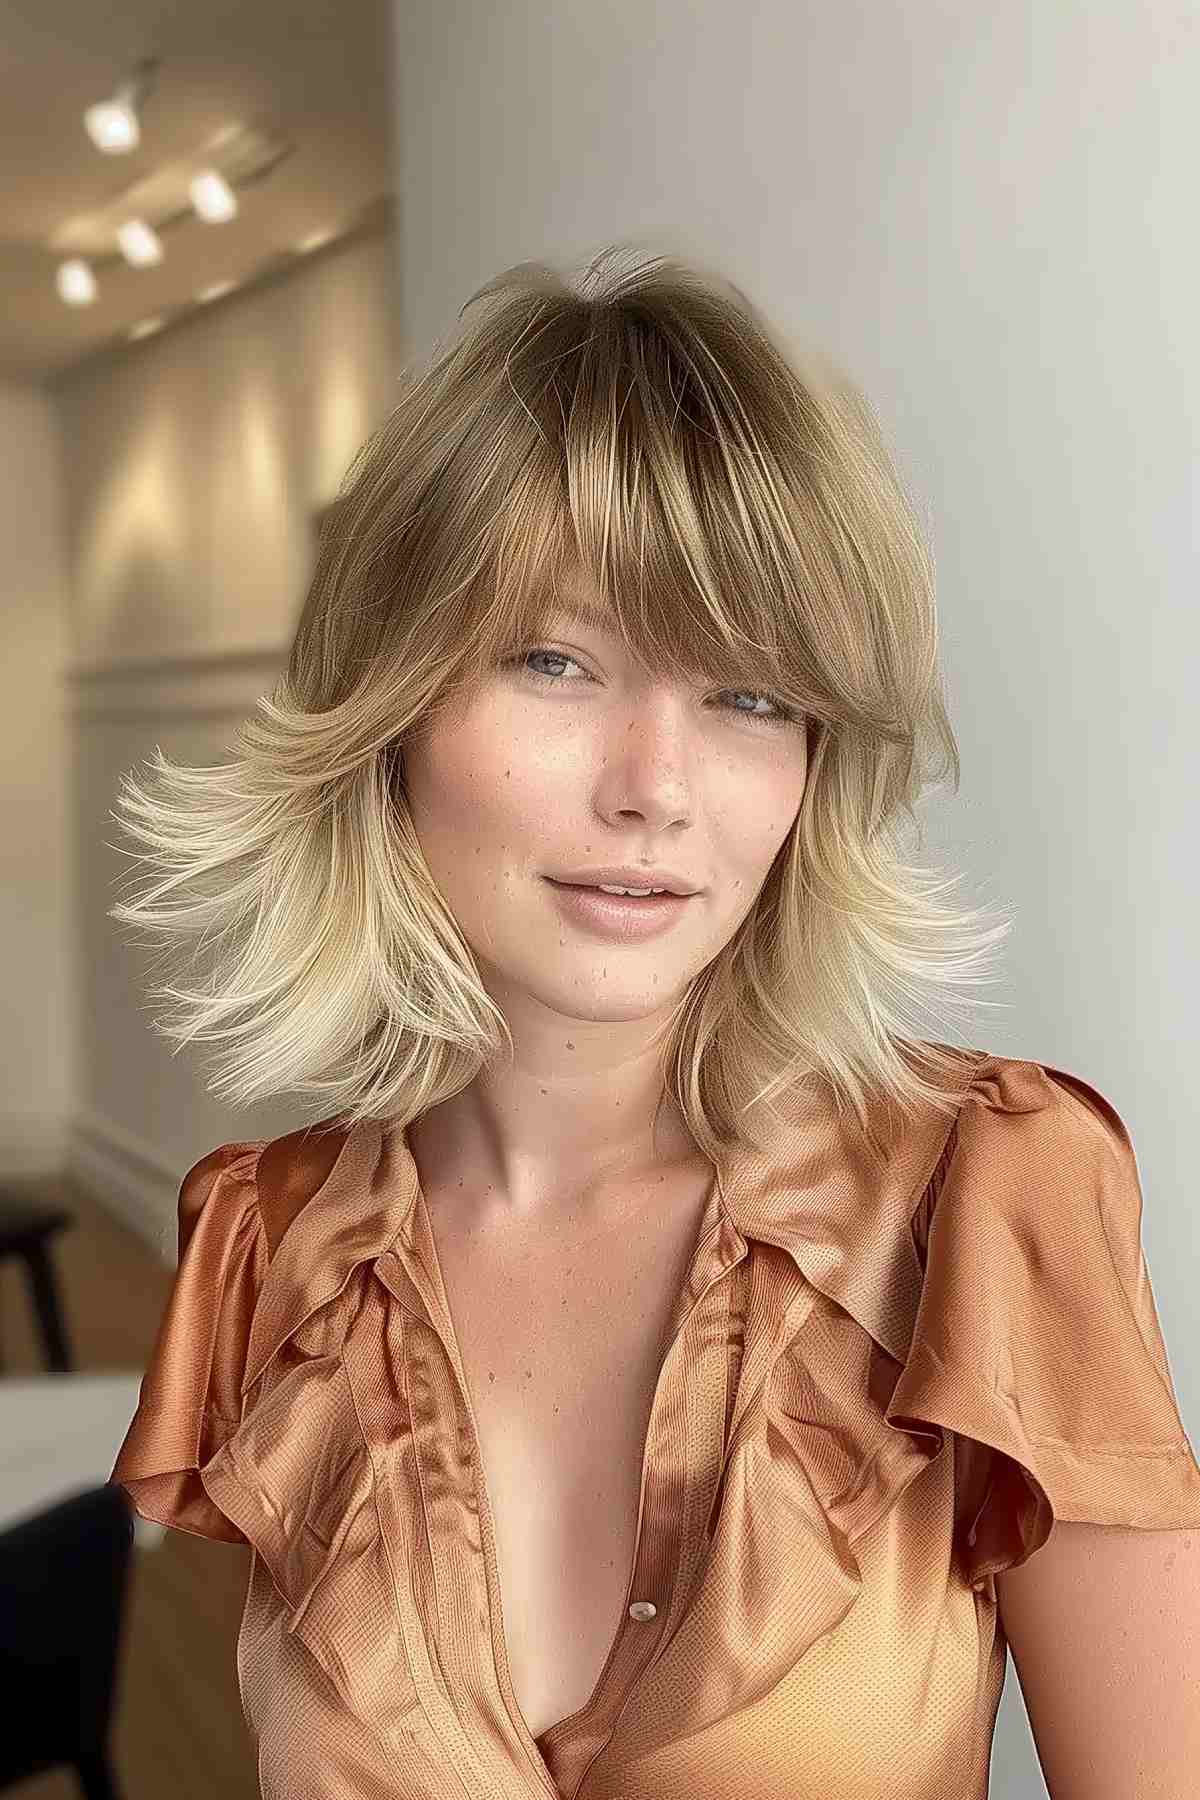 Woman with retro 70s-inspired long bob and bangs.